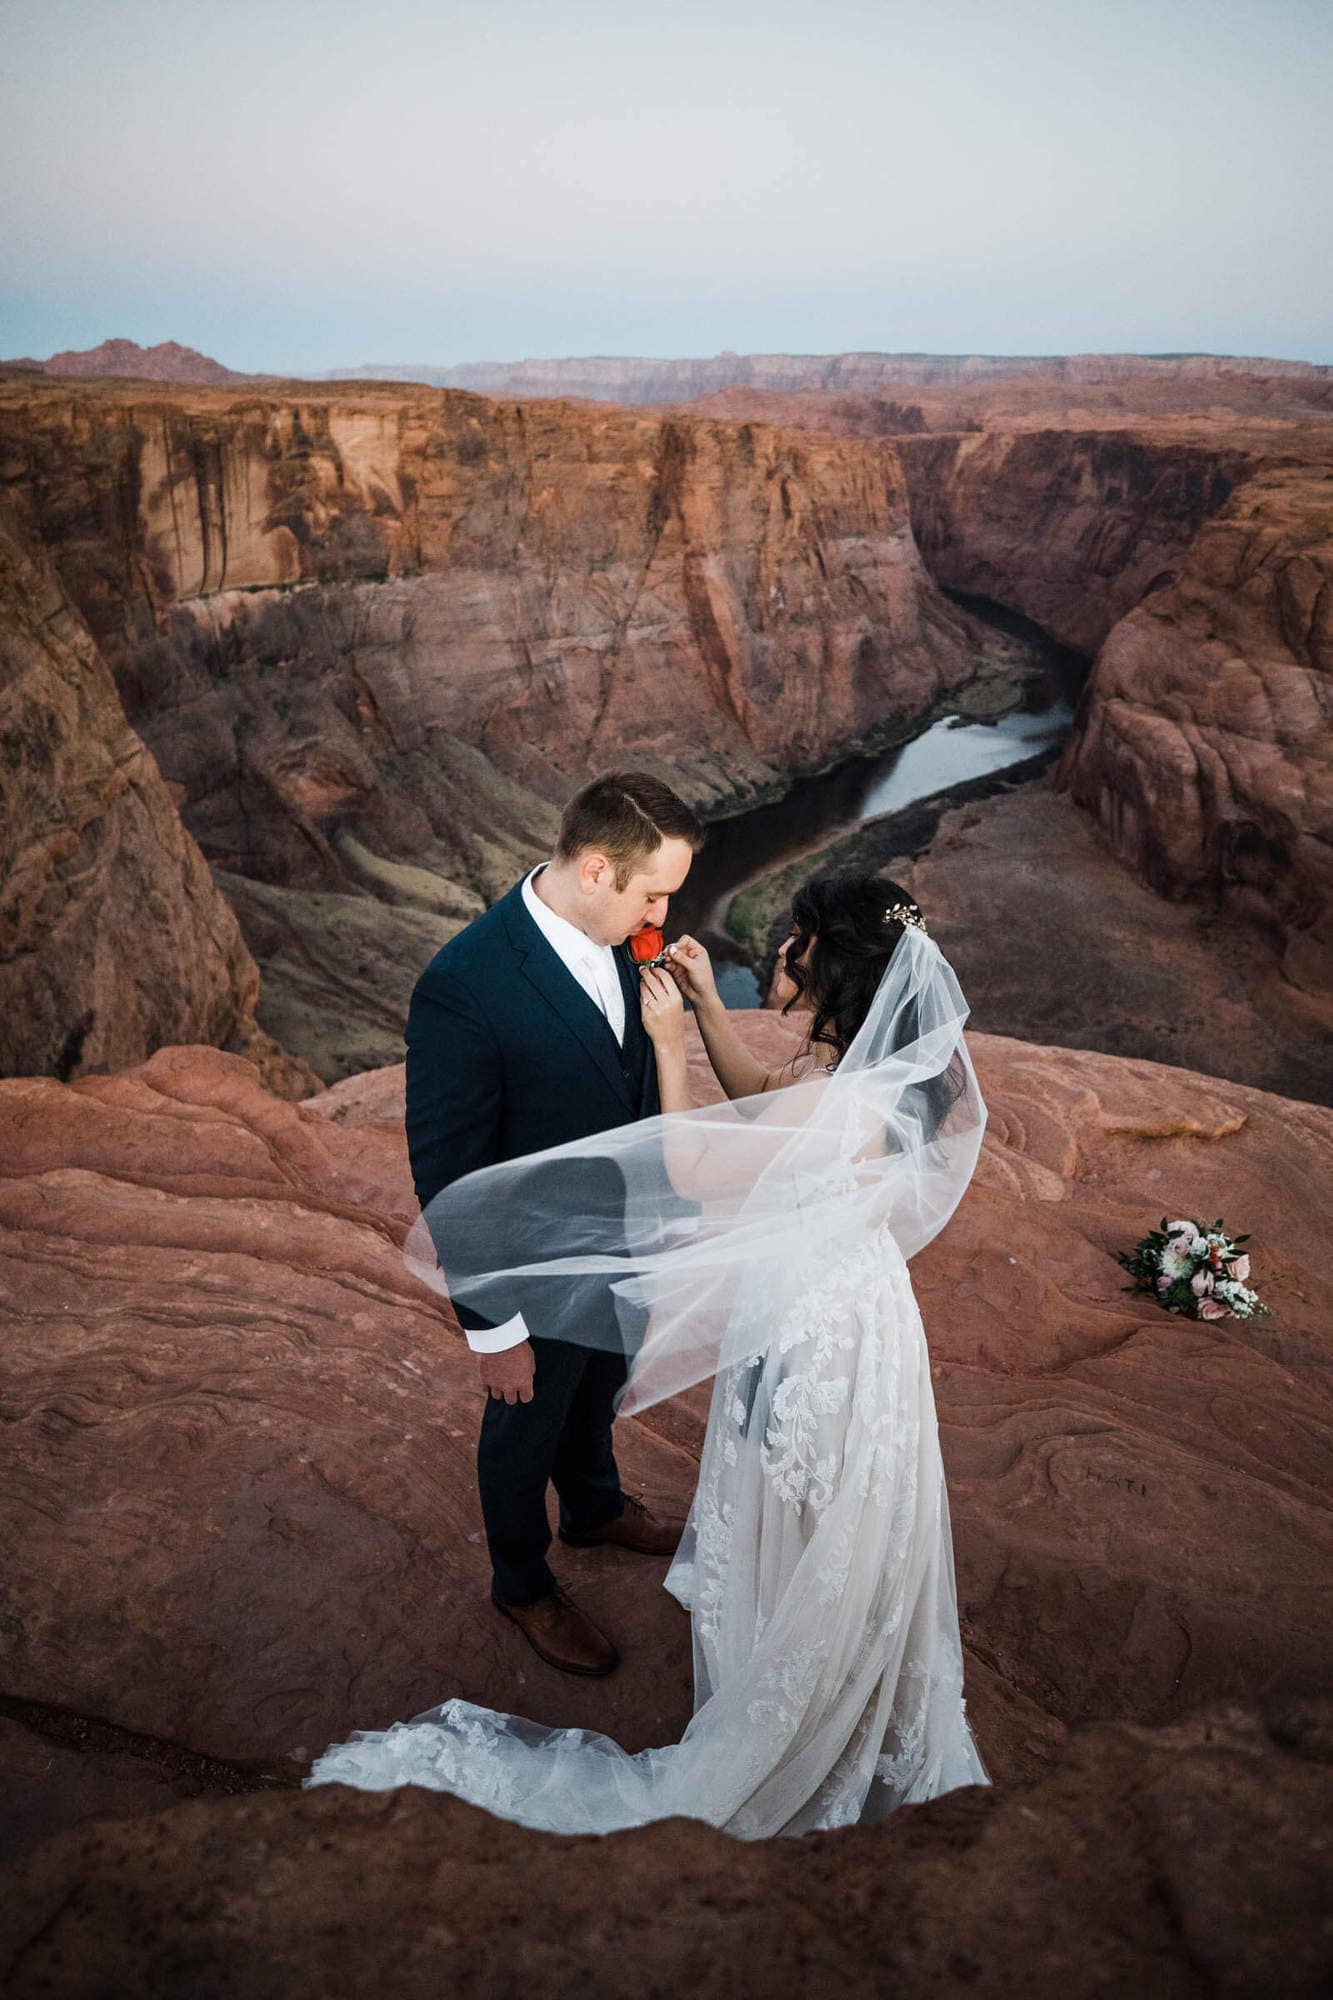 Horseshoe Bend is iconic, popular, and crowded spot. But this sunrise start meant this Horseshoe Bend elopement was all the views + no crowds.